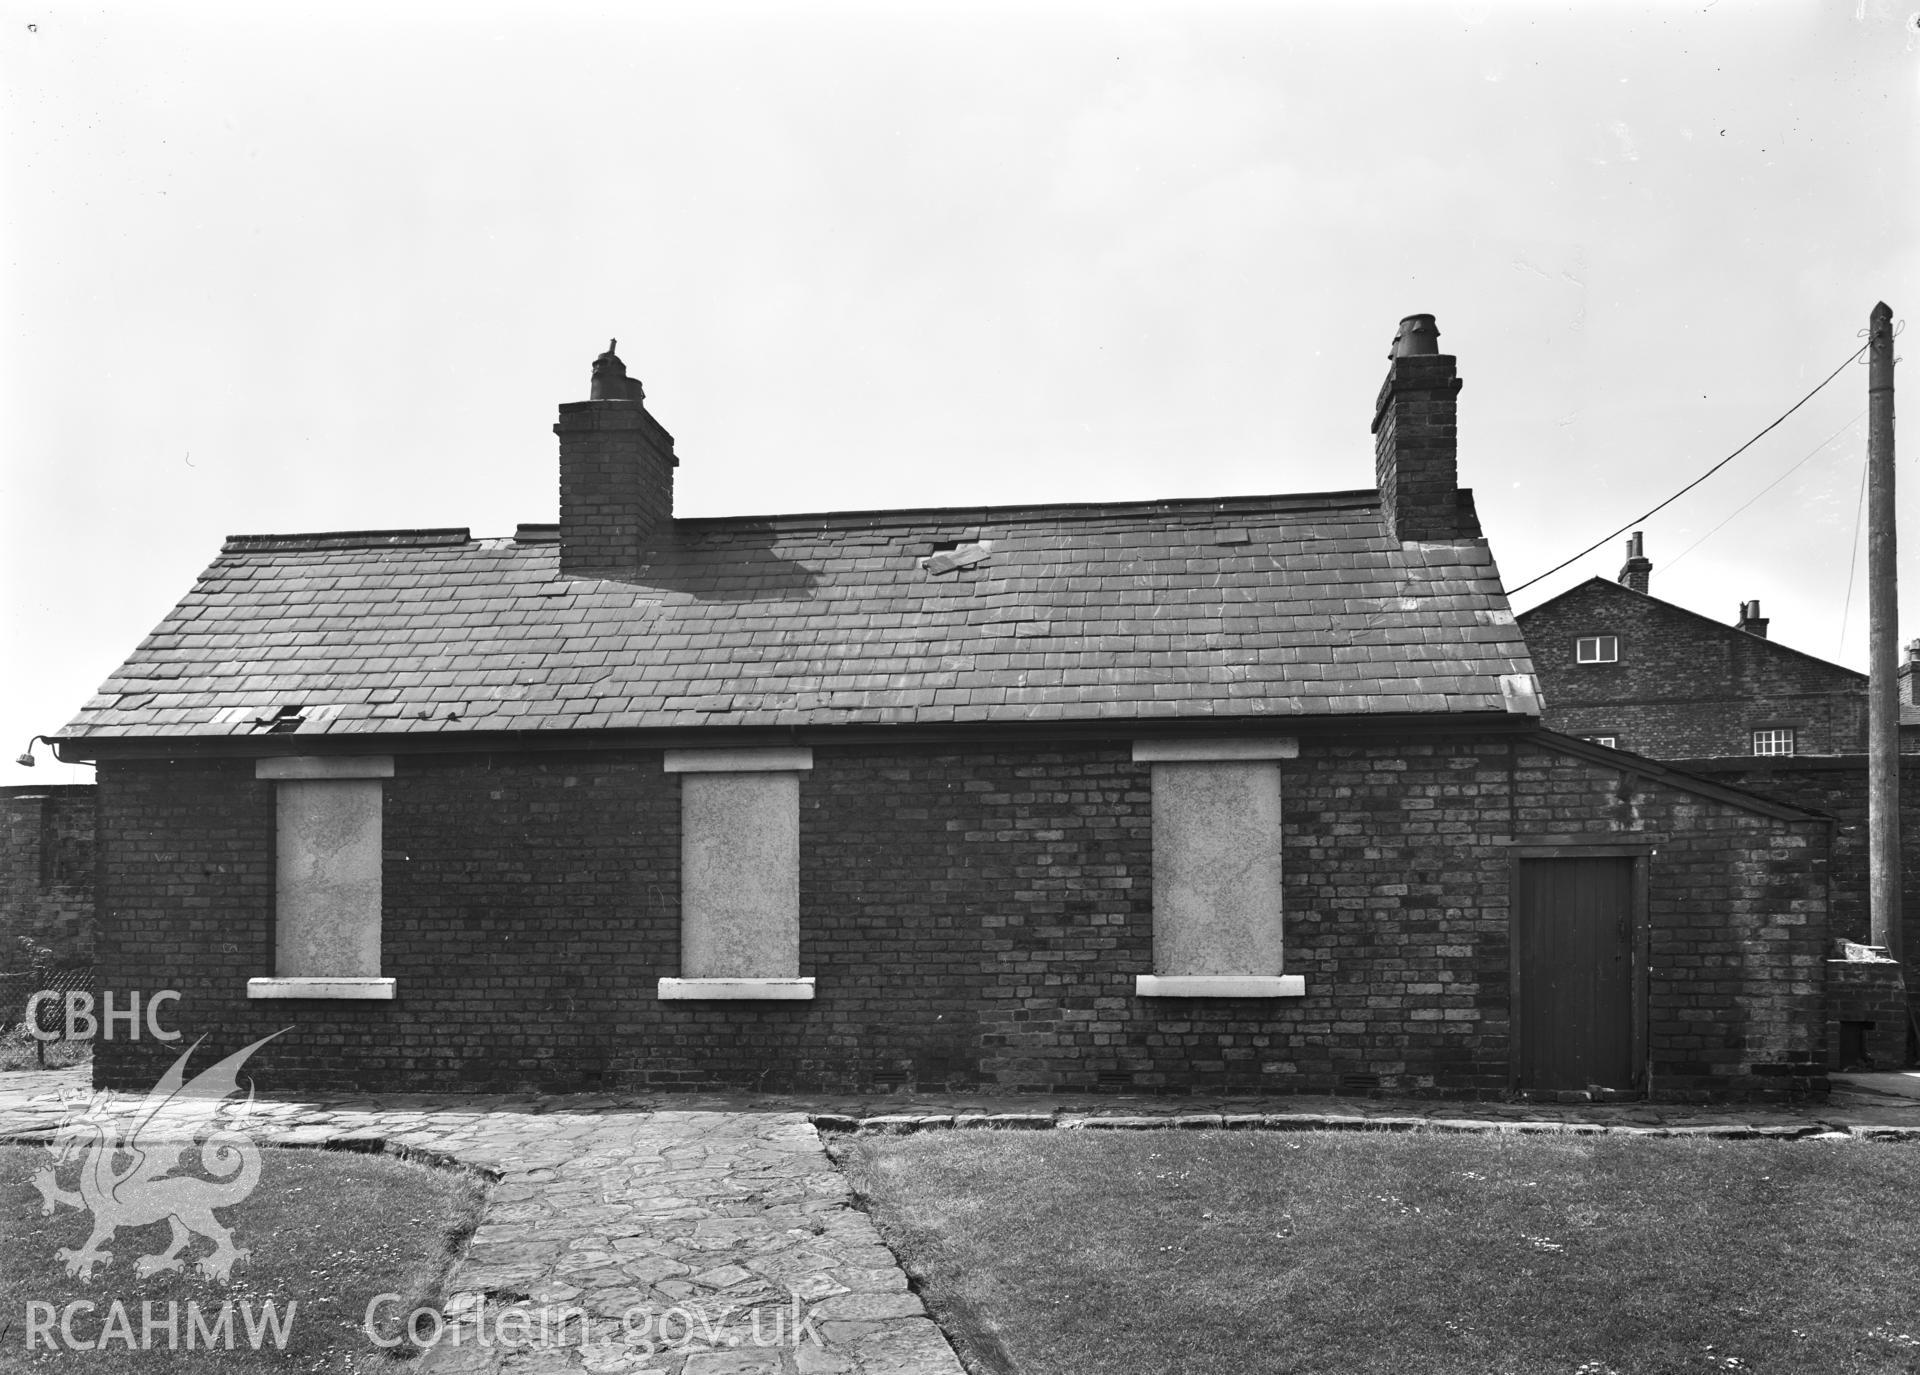 D.O.E photograph of Flint Gaol - cottage from north east. In castle outer ward (since removed).